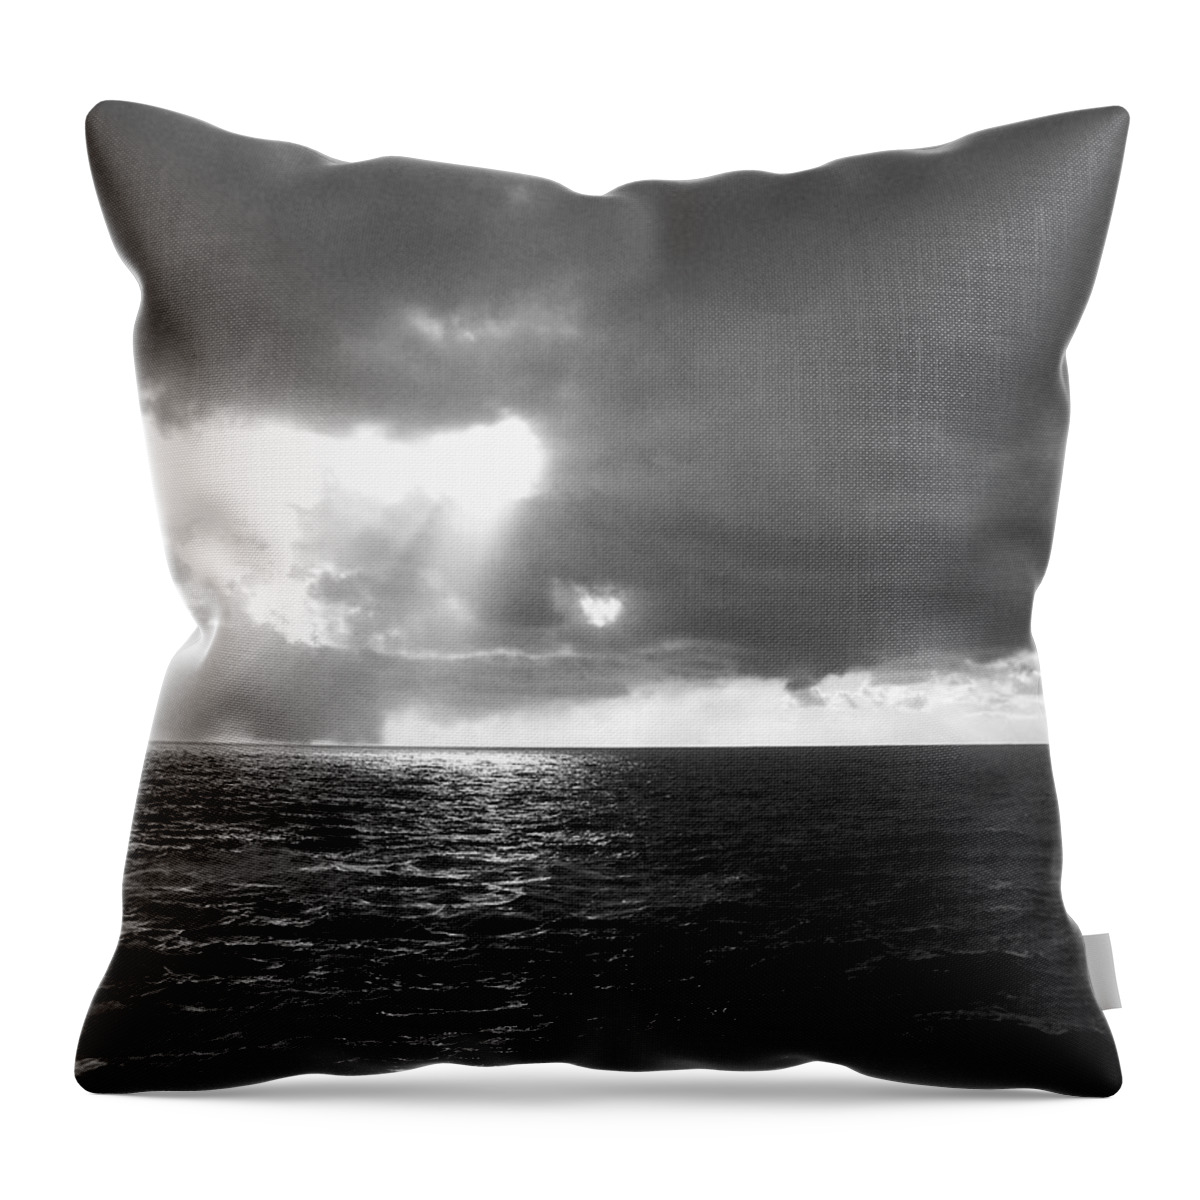 Ocean Throw Pillow featuring the photograph The opening by Heather L Wright